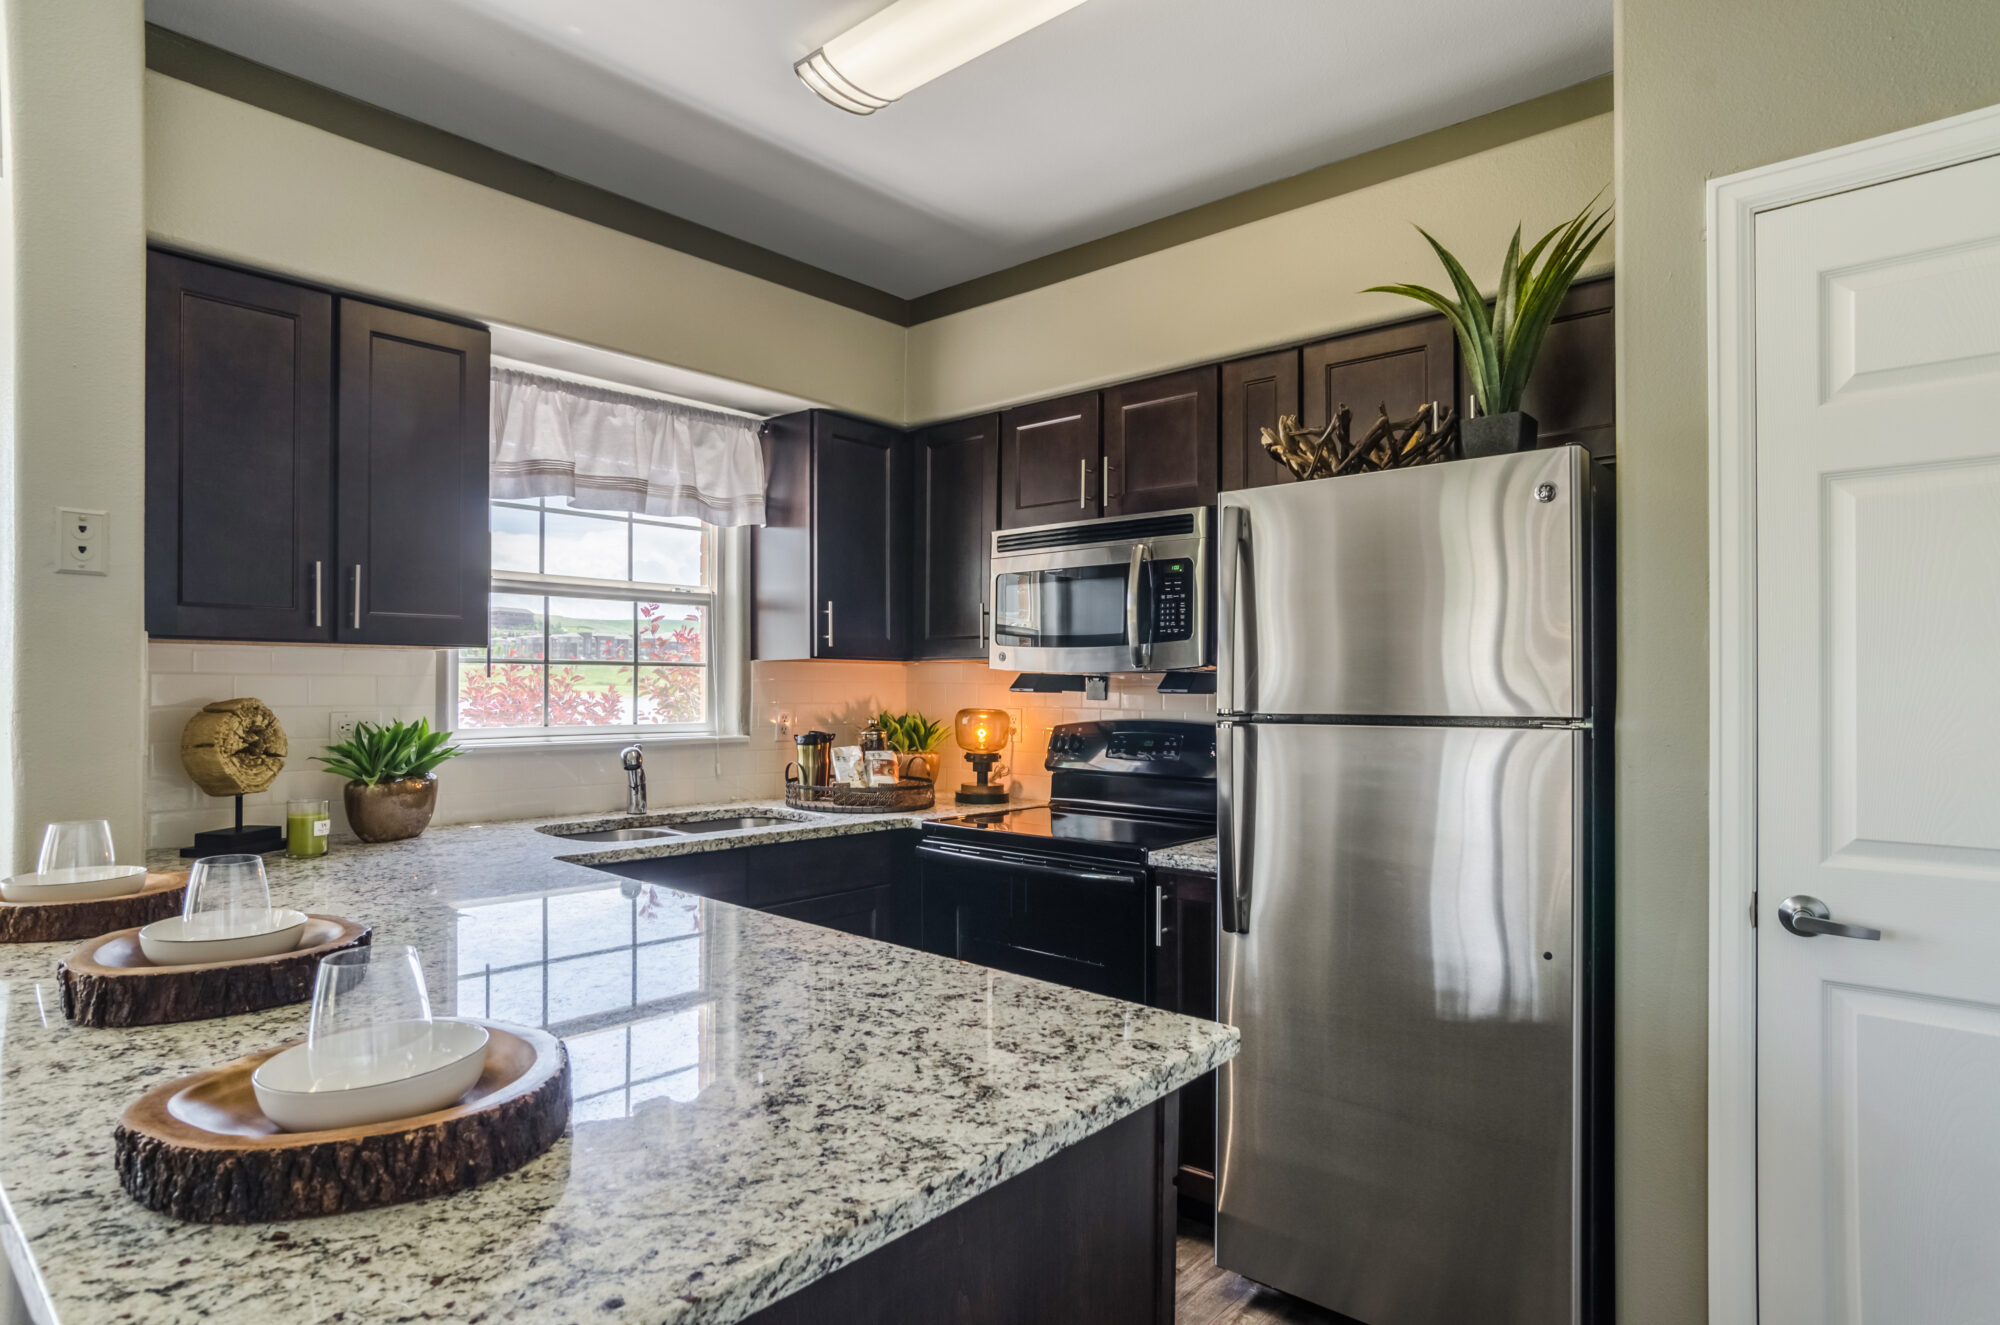 Kitchen with stainless steel appliances, granite counters, and tile backsplash